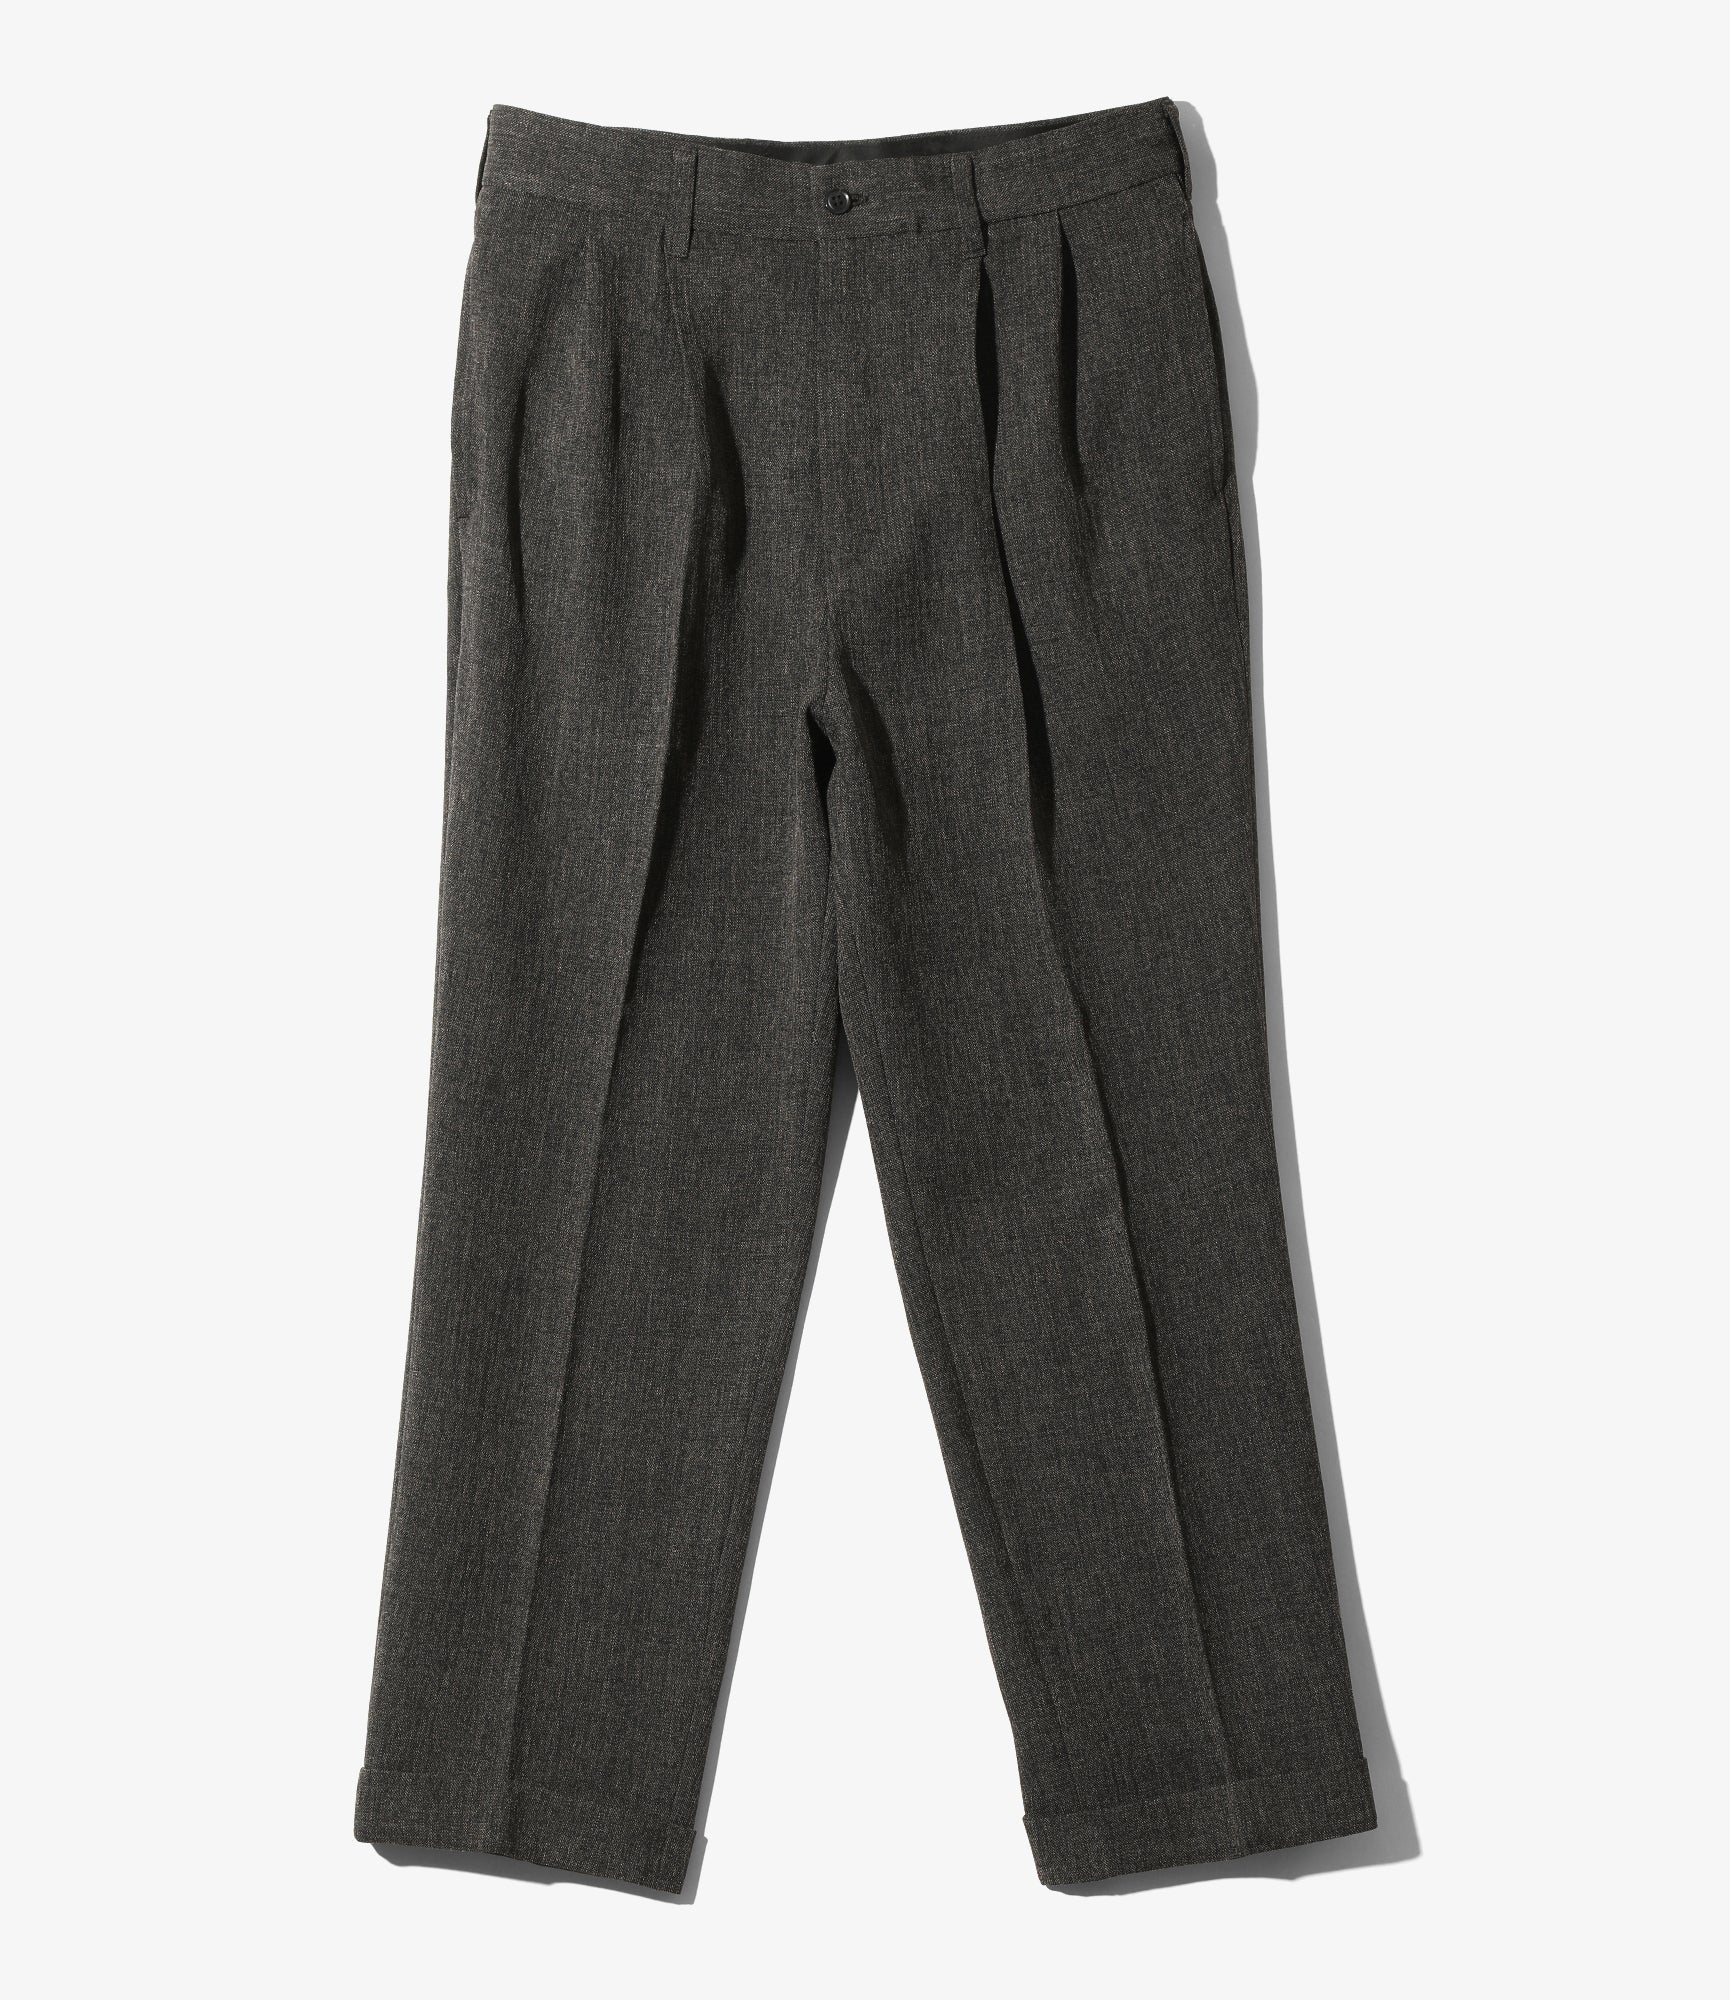 Needles Tucked Trouser - PE/PU Stretch Twill - Black | Nepenthes